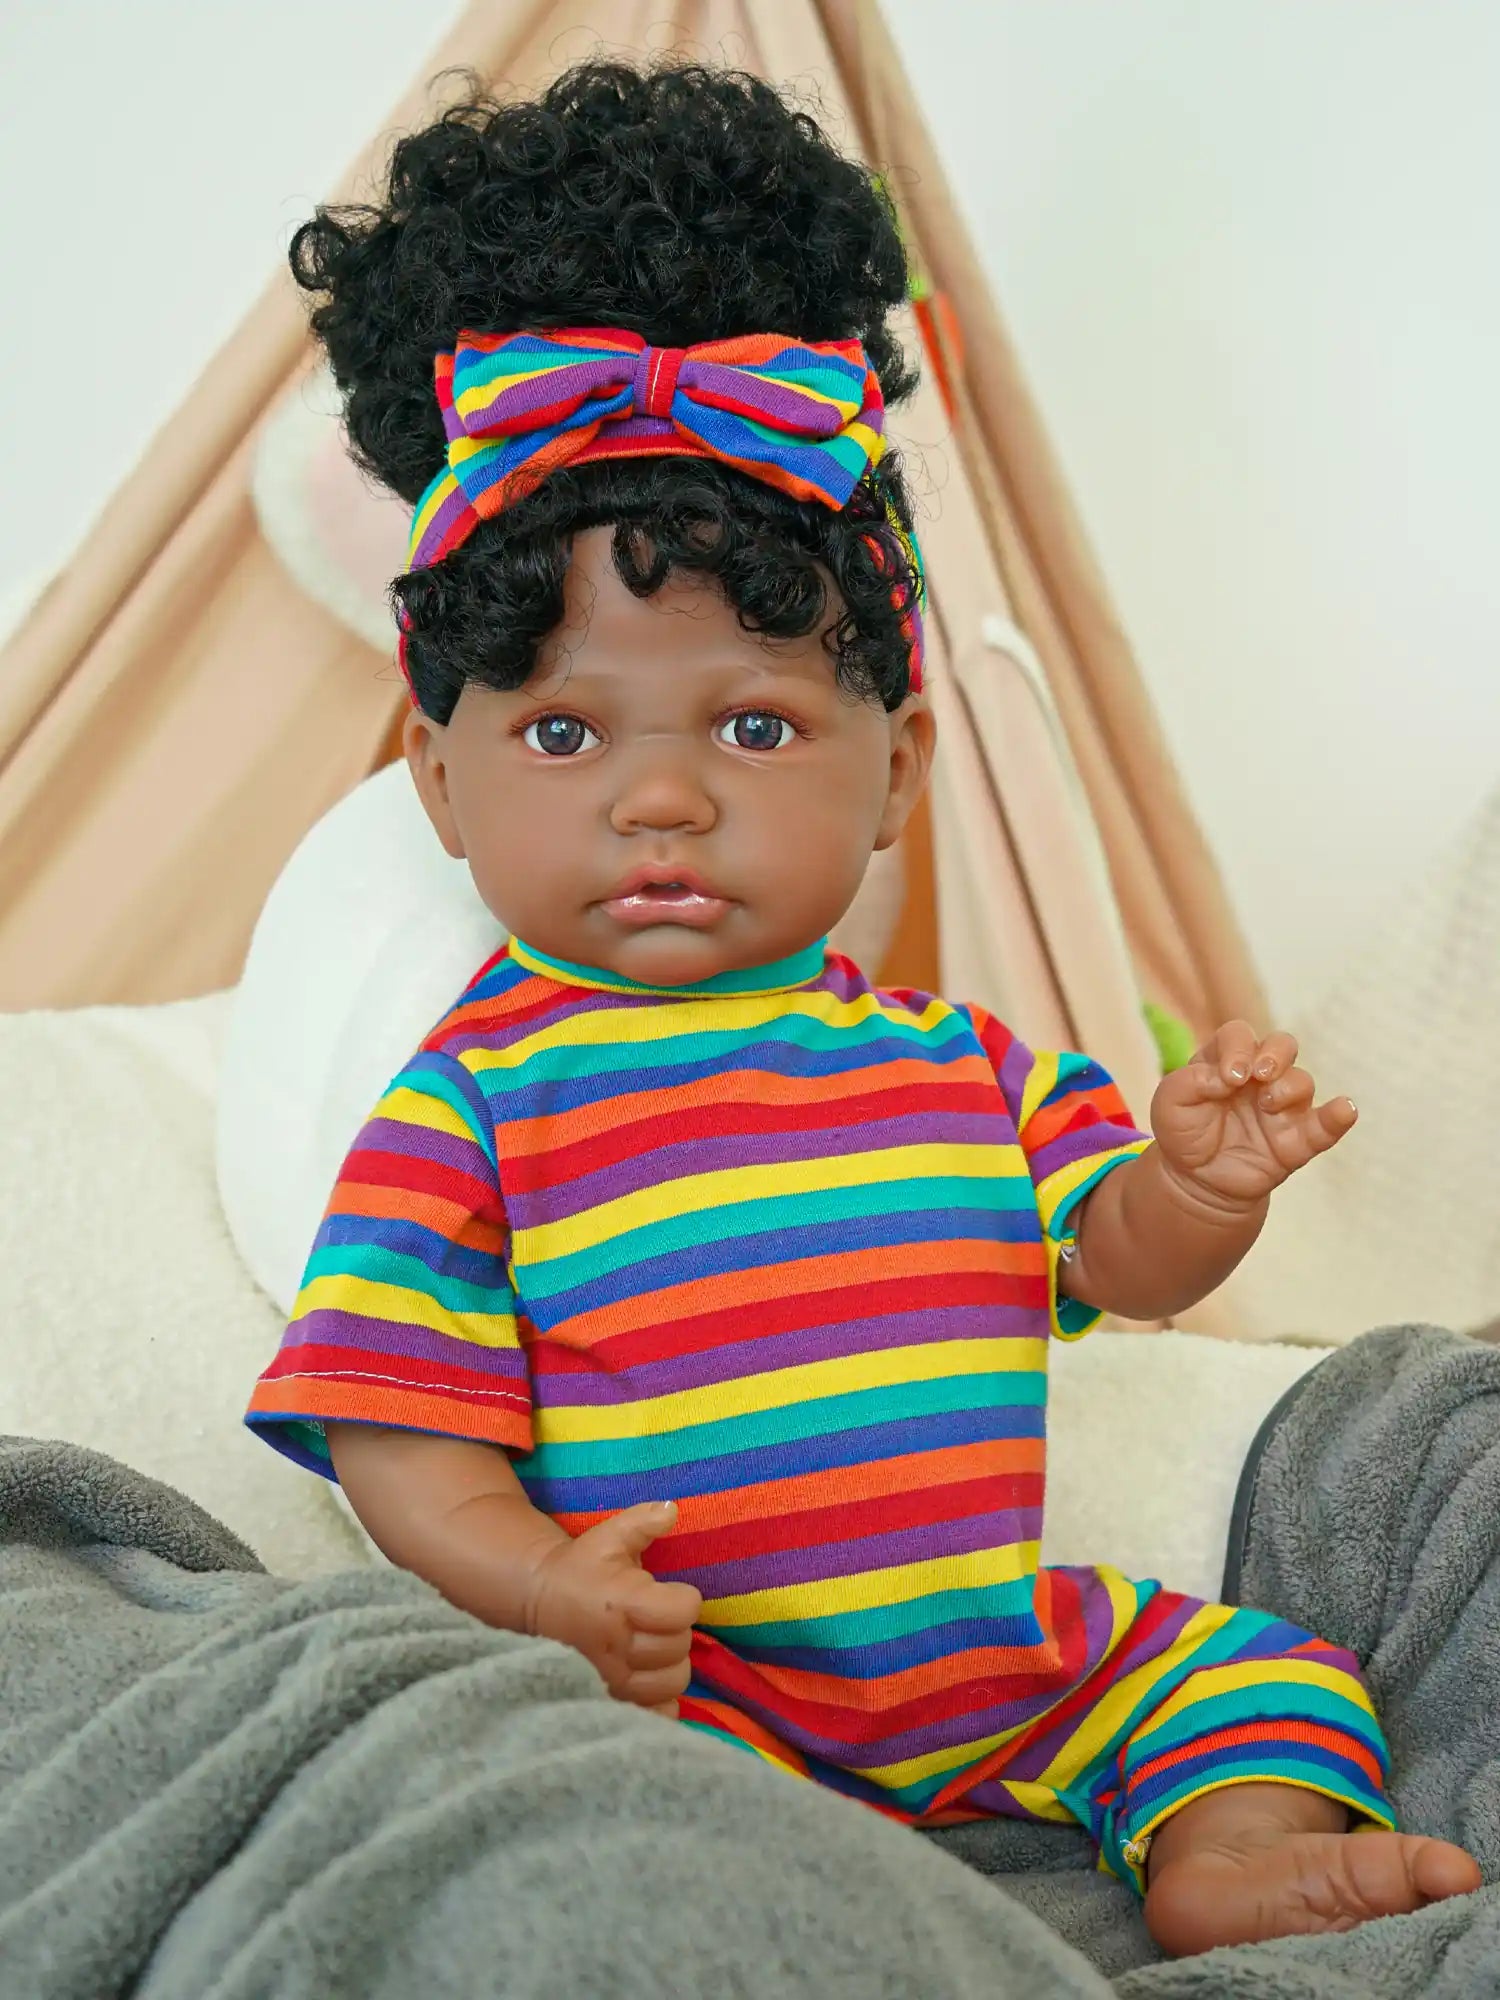 A black reborn baby doll sitting on a sofa wearing multi-colored striped clothes